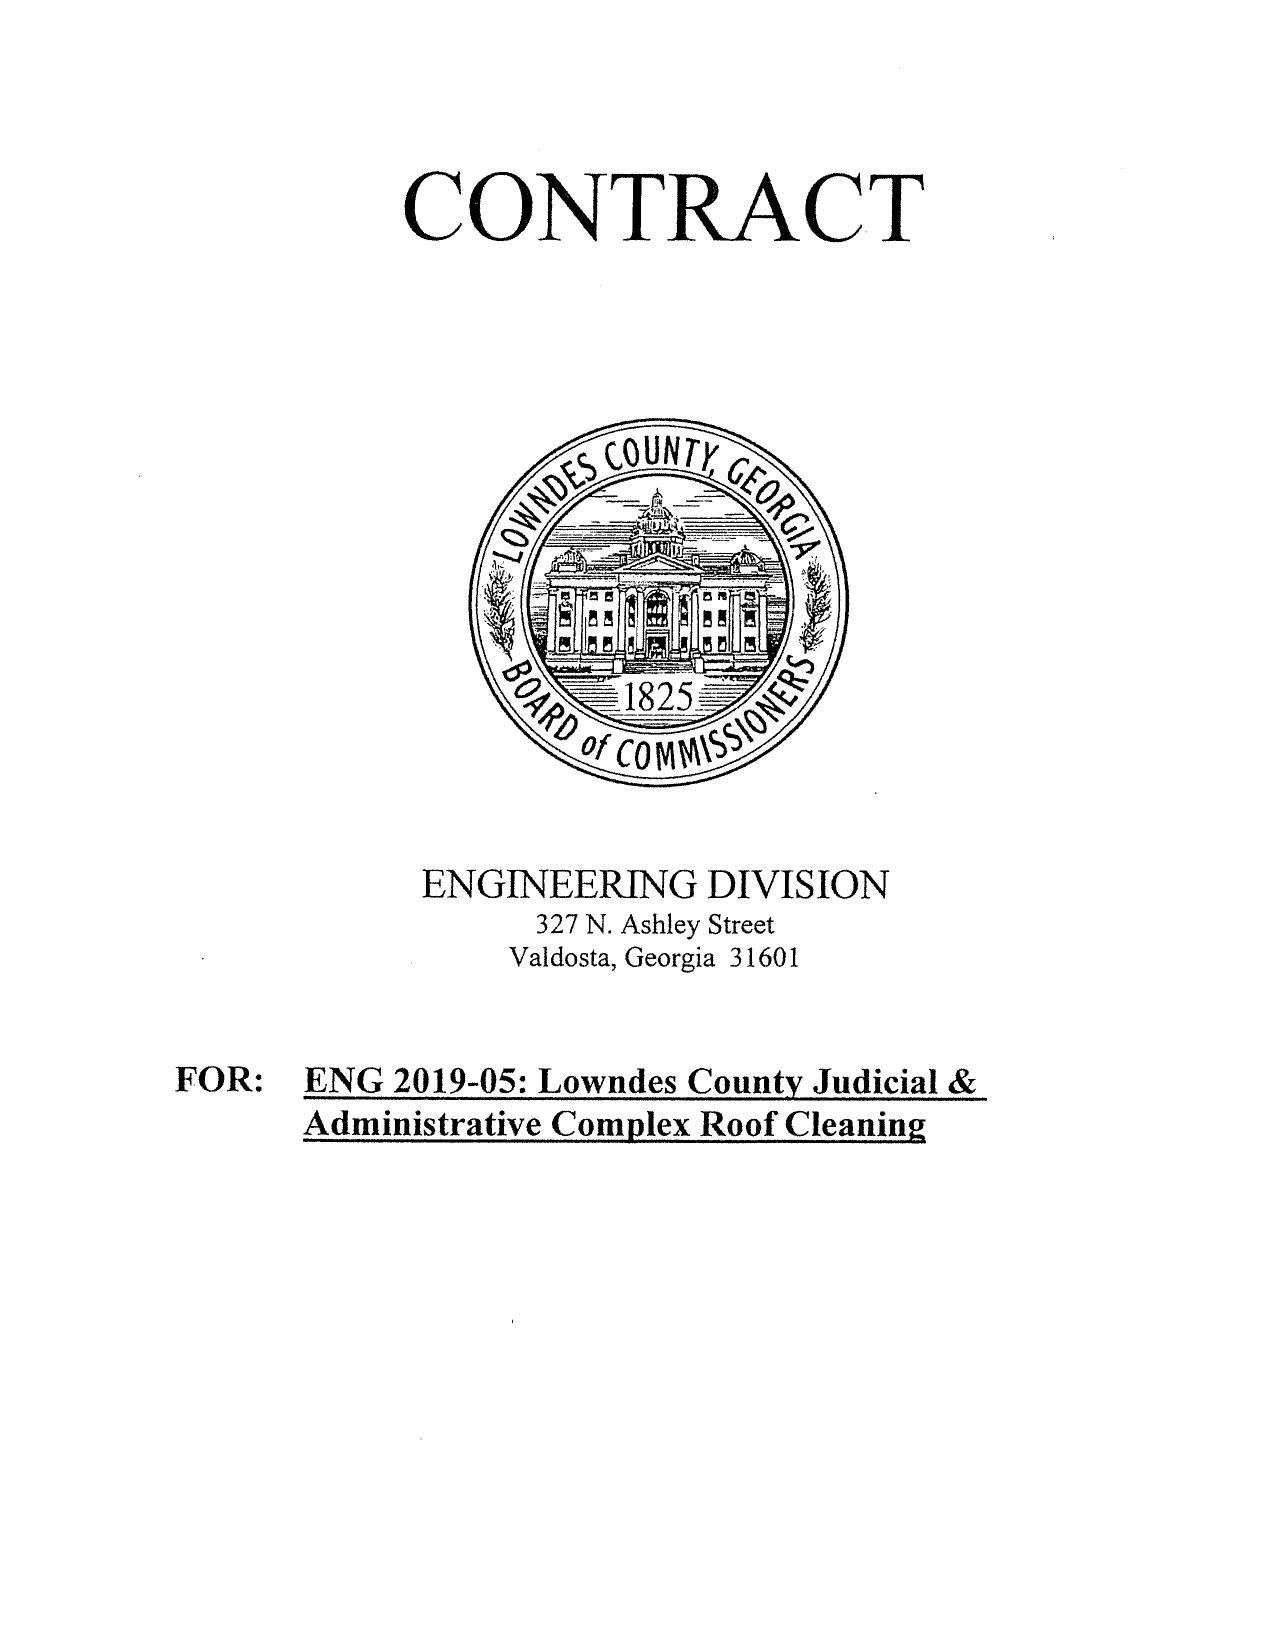 CONTRACT FOR: ENG 2019-05